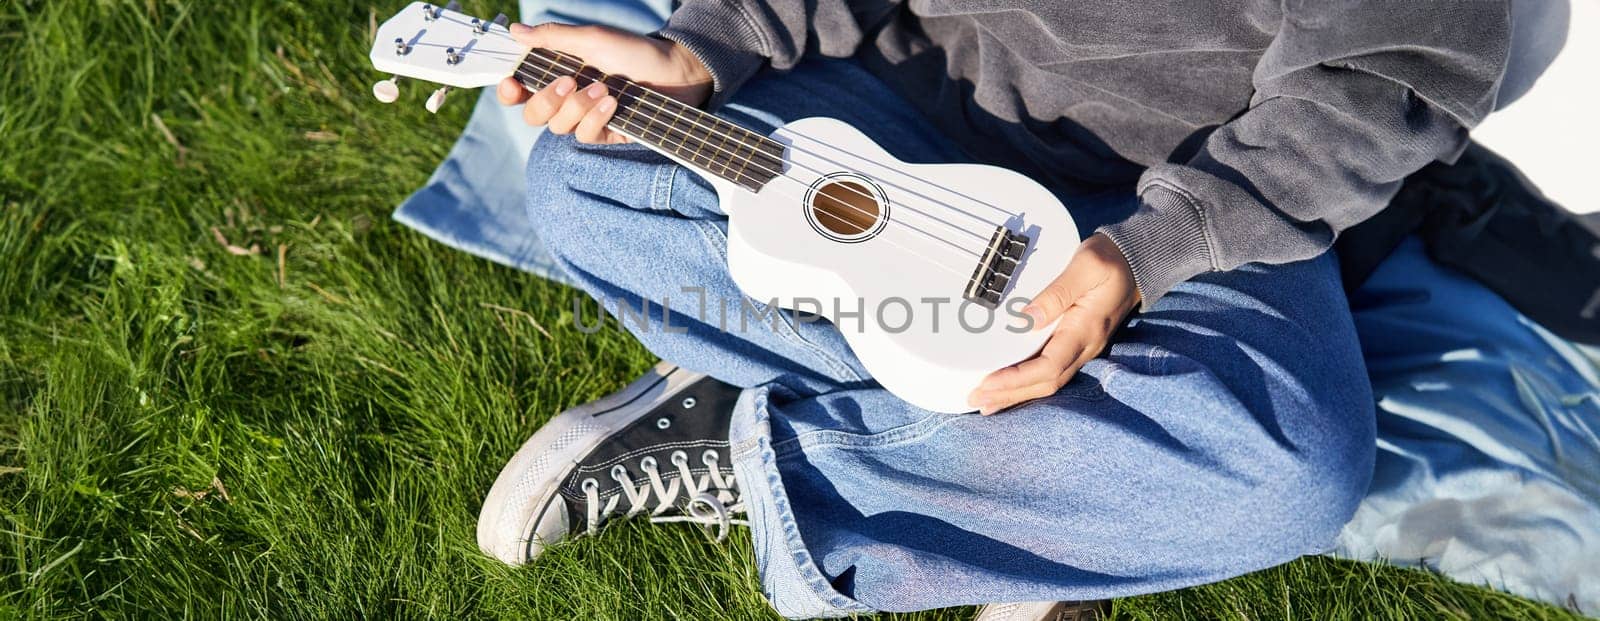 Music and instruments. Close up, female hands holding white ukulele, musician sitting on grass outdoors and playing.